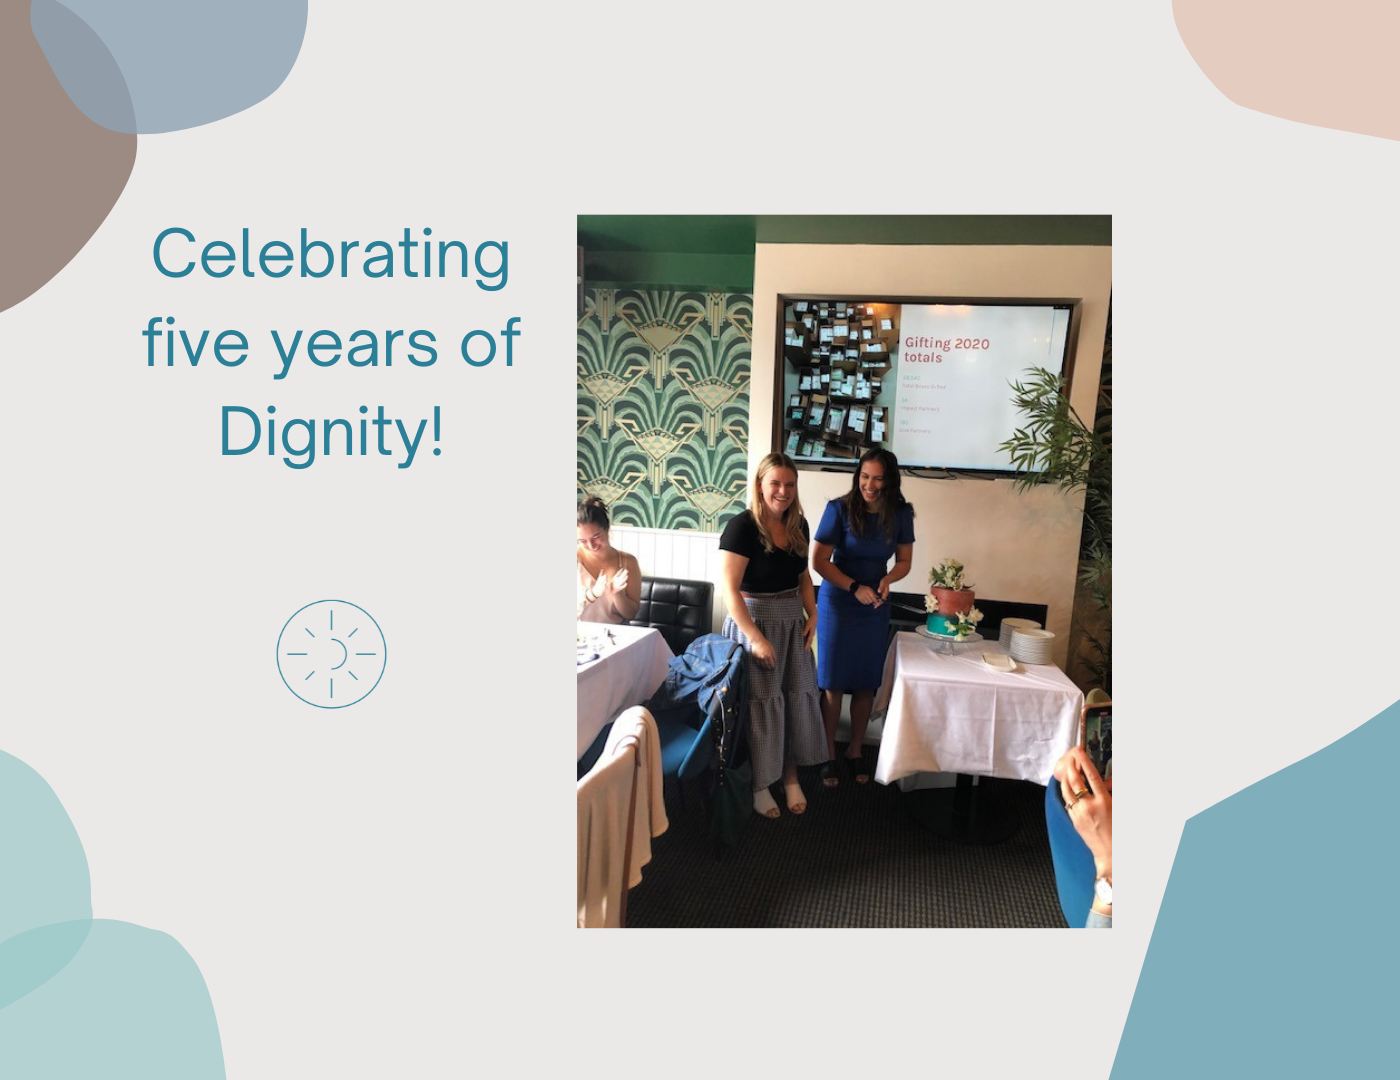 Celebrating five years of Dignity!